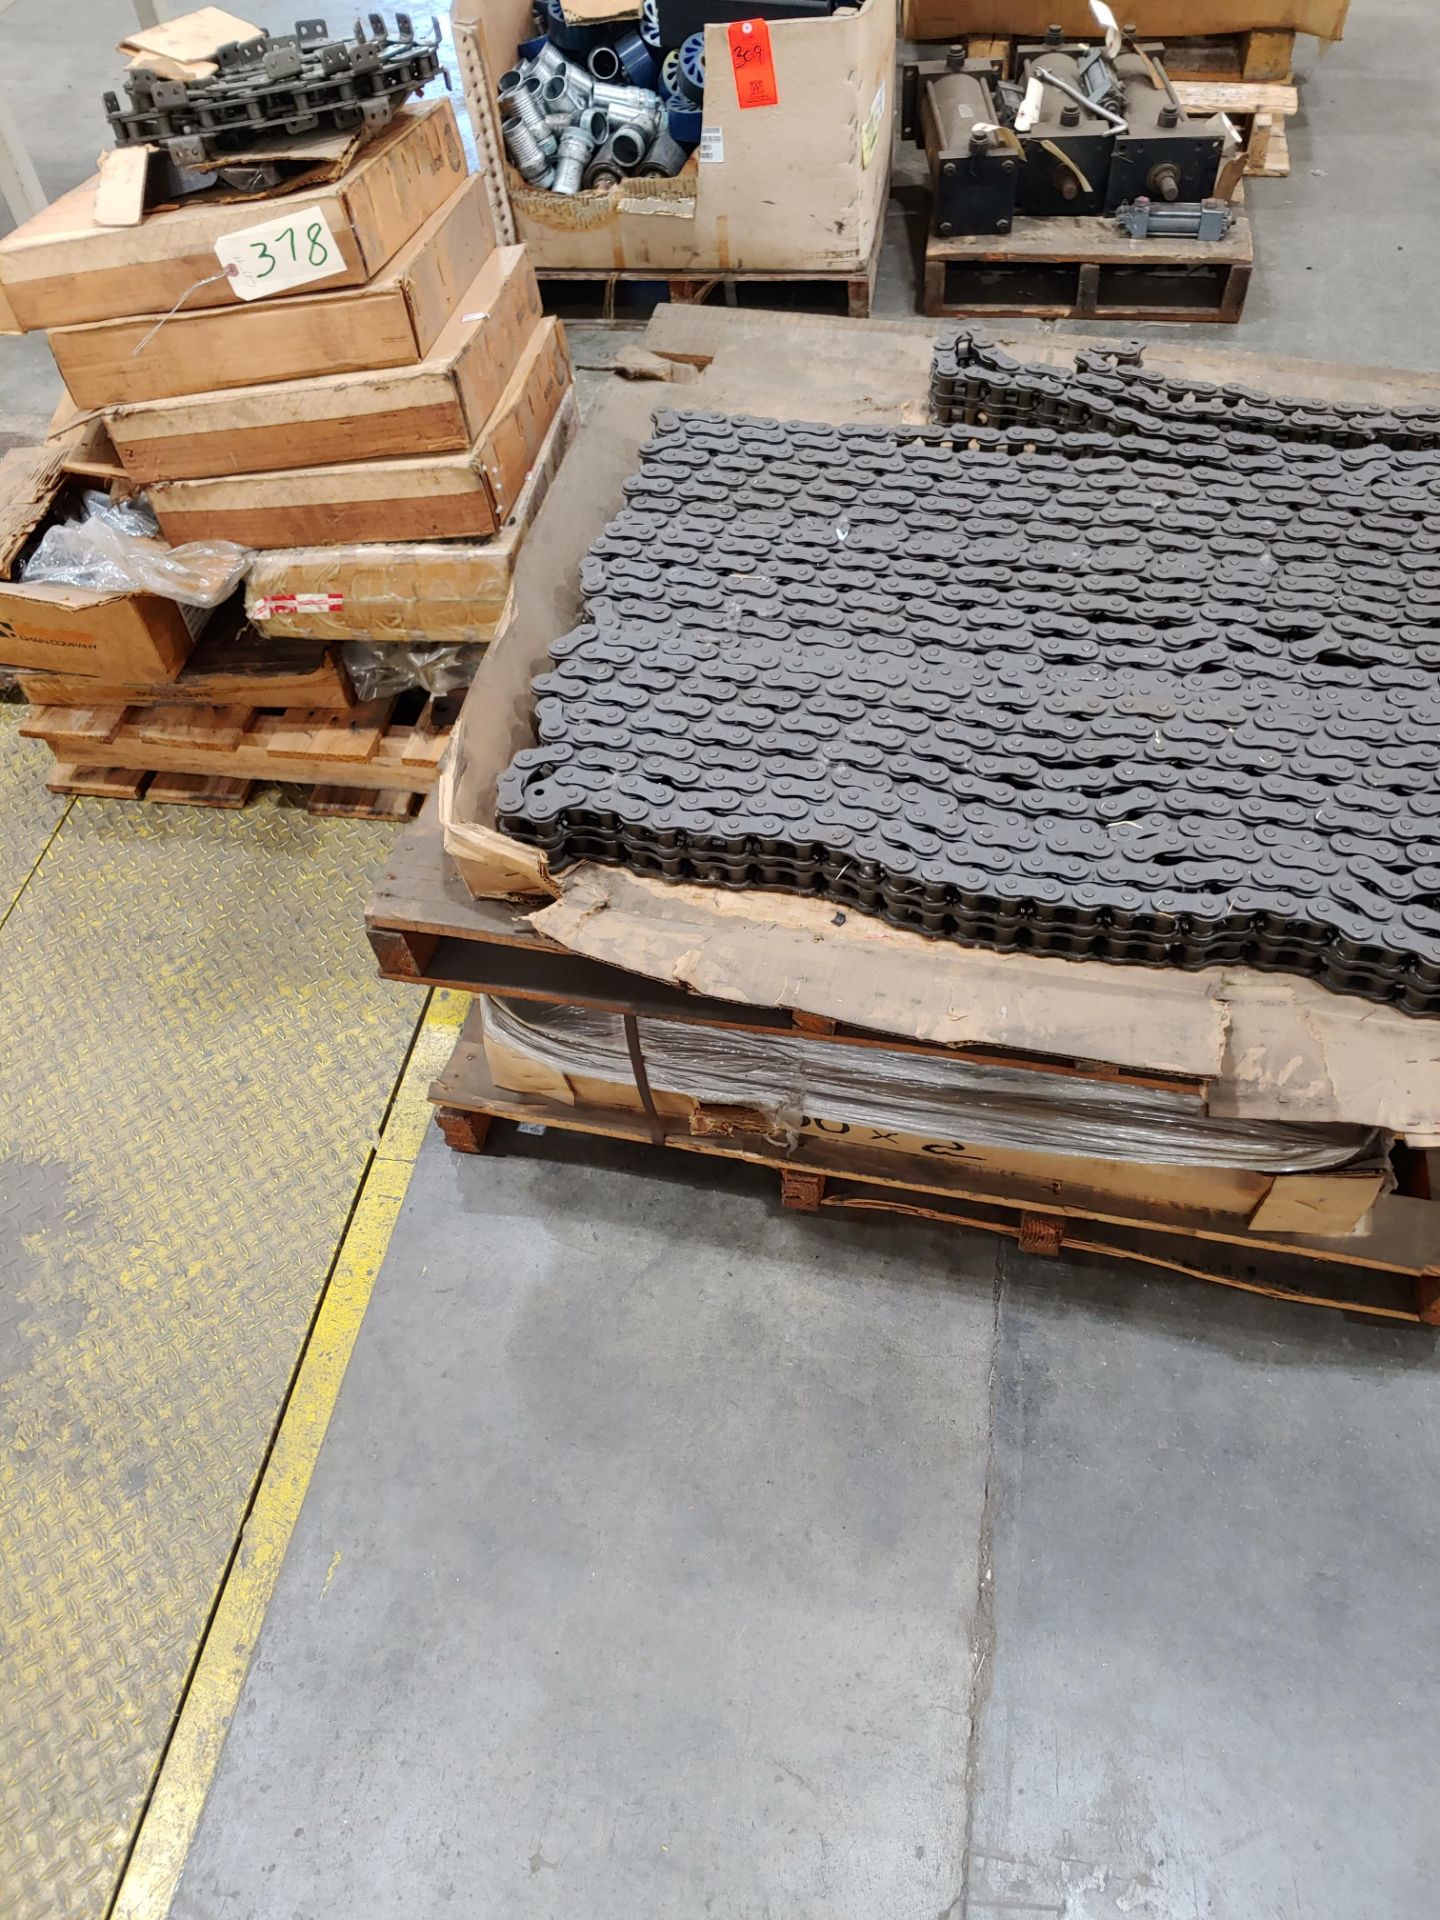 Lot - Misc. Chains and Steel, on Pallet